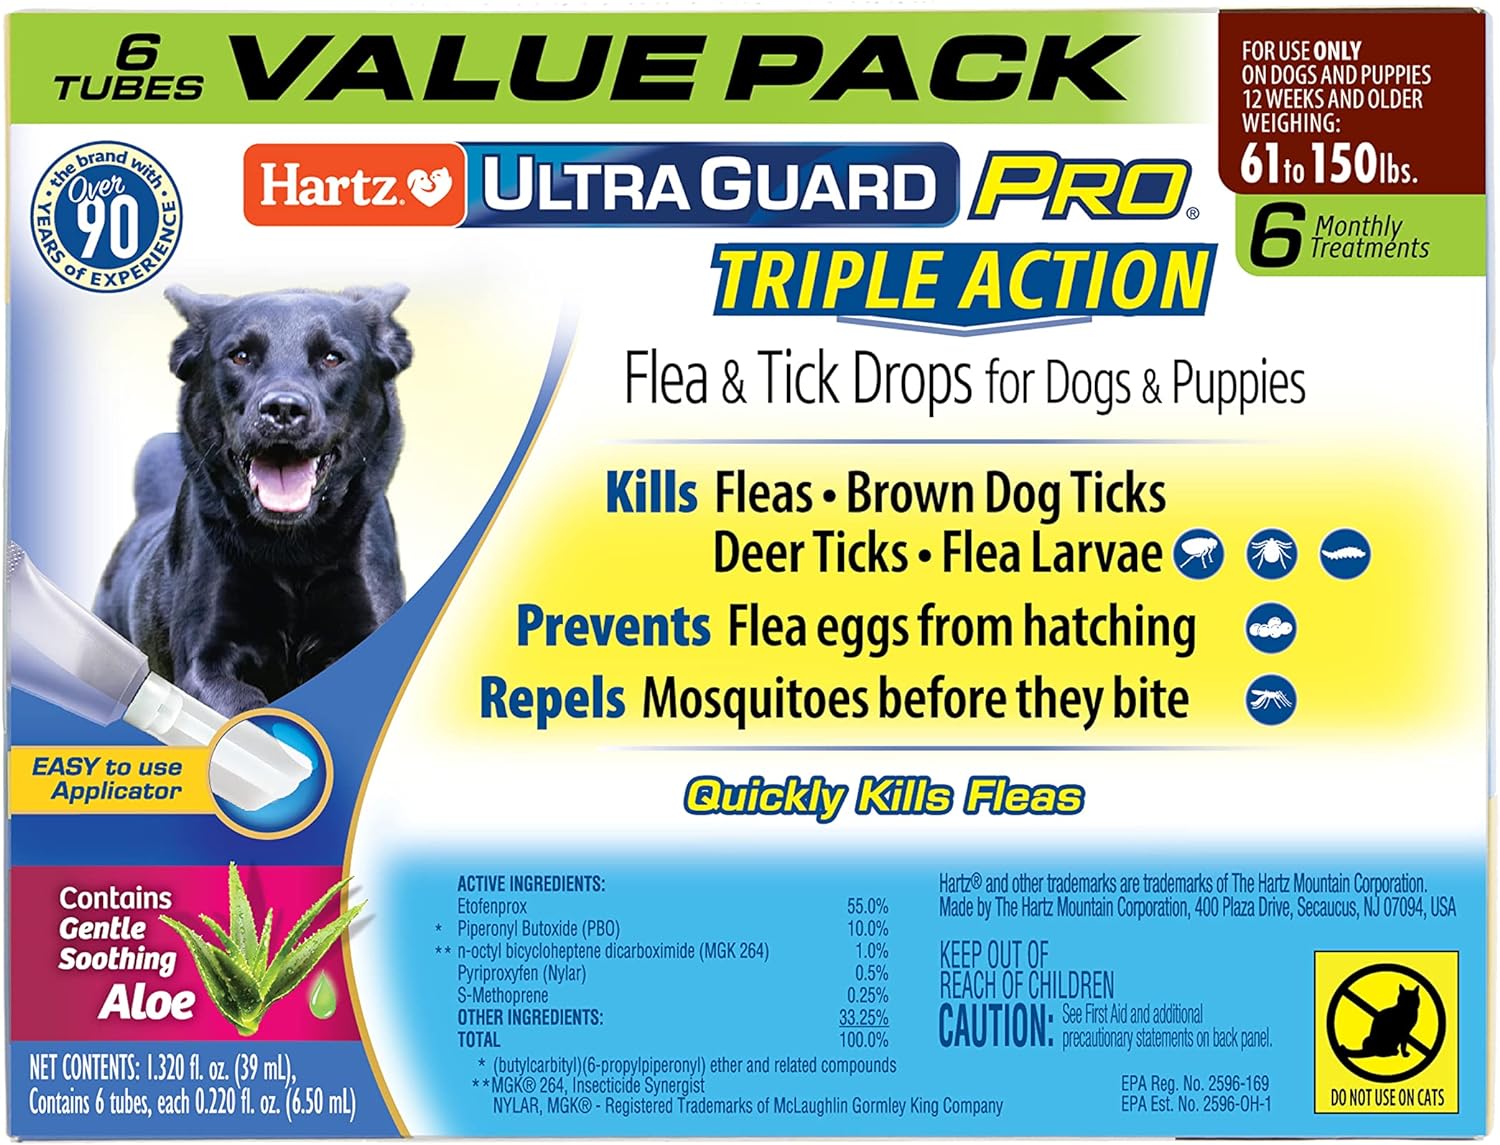 Hartz UltraGuard Pro Topical Flea & Tick Prevention for Dogs and Puppies, 61-150 lbs 6 Monthly Treatments